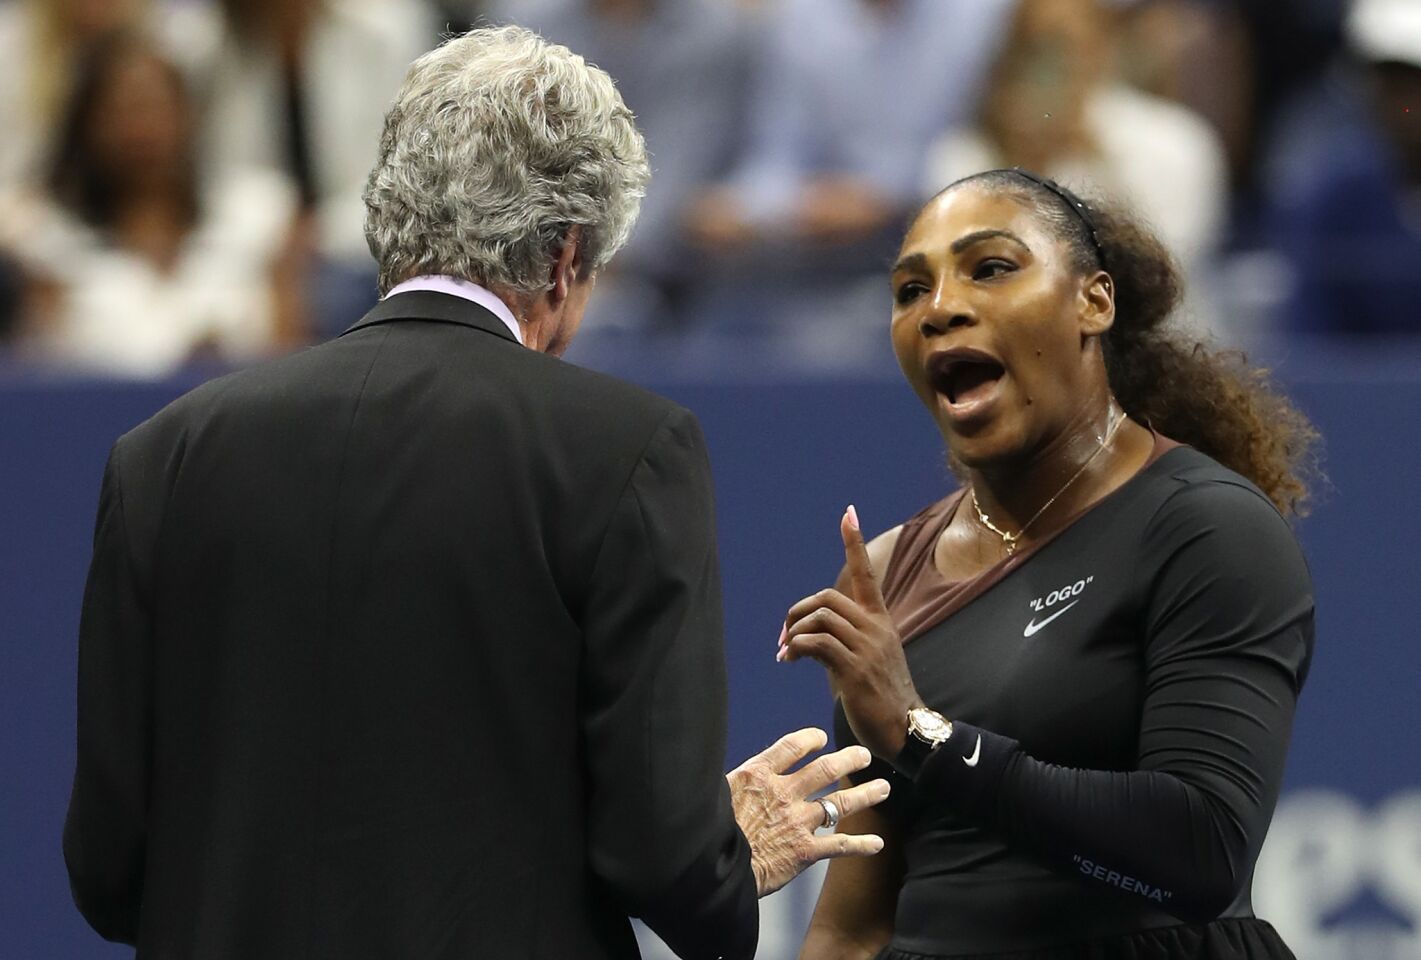 NEW YORK, NY - SEPTEMBER 08: Serena Williams of the United States argues with referee Brian Earley during her Women's Singles finals match against Naomi Osaka of Japan on Day Thirteen of the 2018 US Open at the USTA Billie Jean King National Tennis Center on September 8, 2018 in the Flushing neighborhood of the Queens borough of New York City. (Photo by Matthew Stockman/Getty Images) ** OUTS - ELSENT, FPG, CM - OUTS * NM, PH, VA if sourced by CT, LA or MoD **